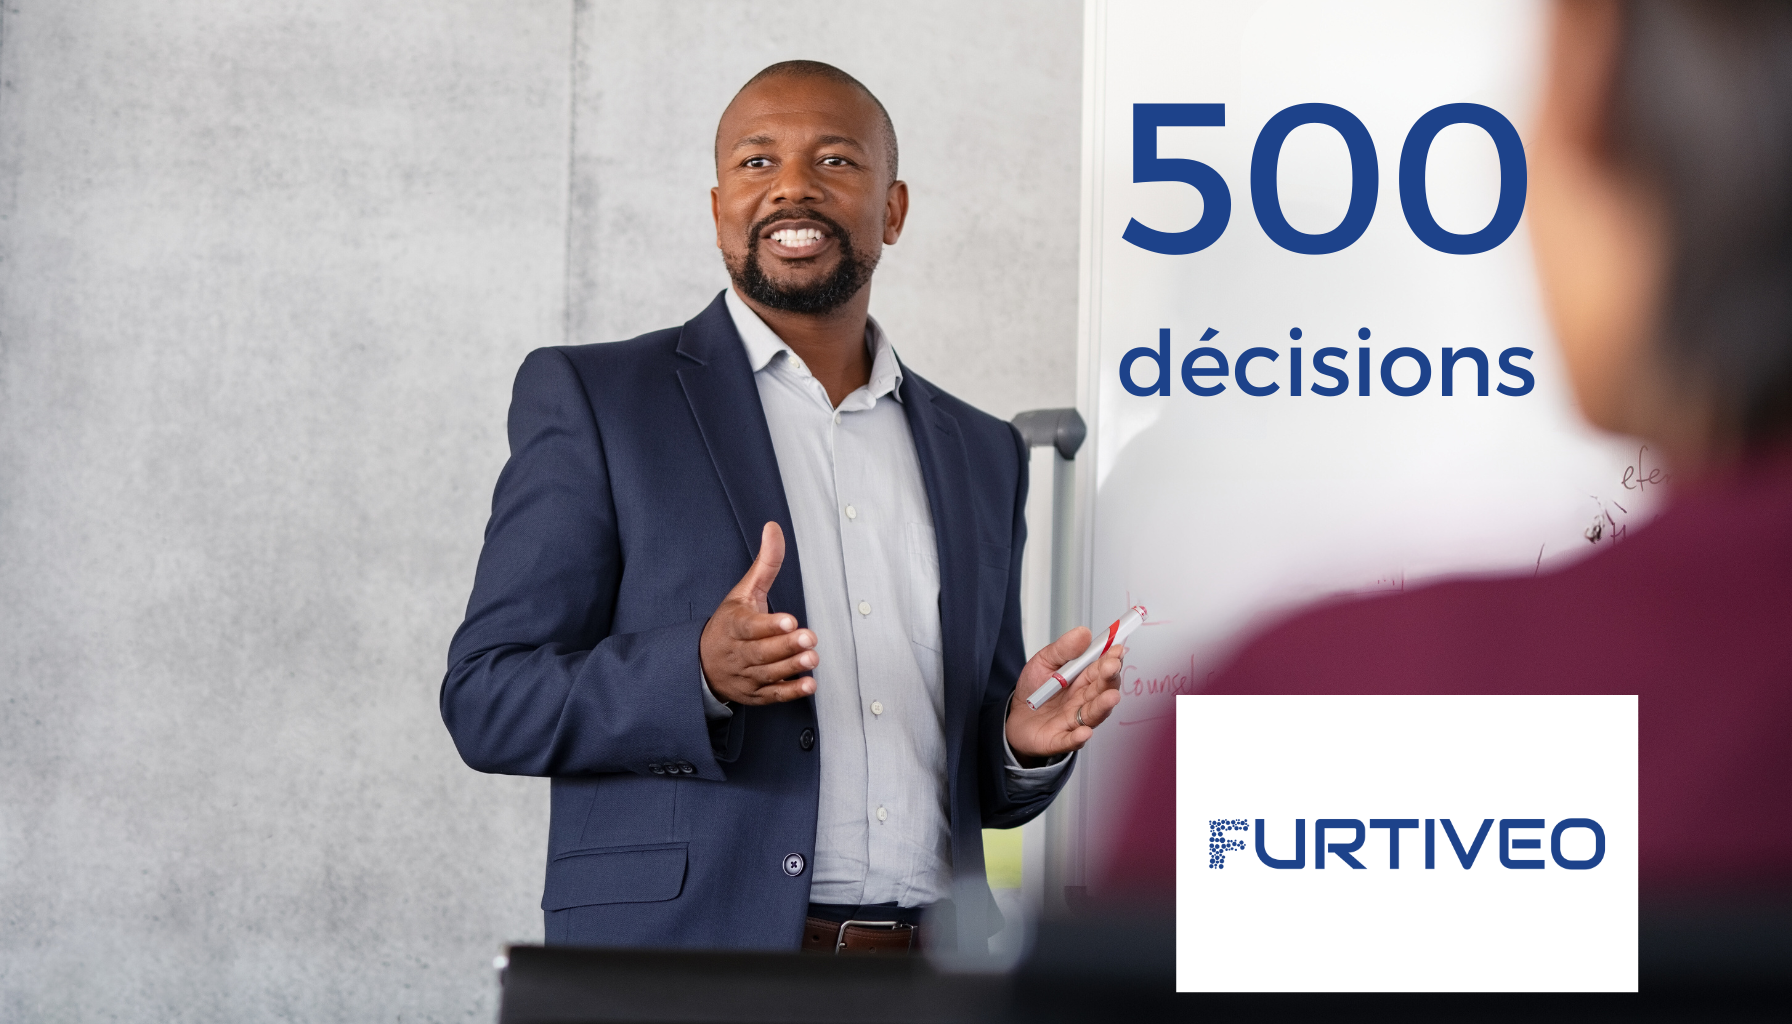 Starting a business: 500 decisions that change everything